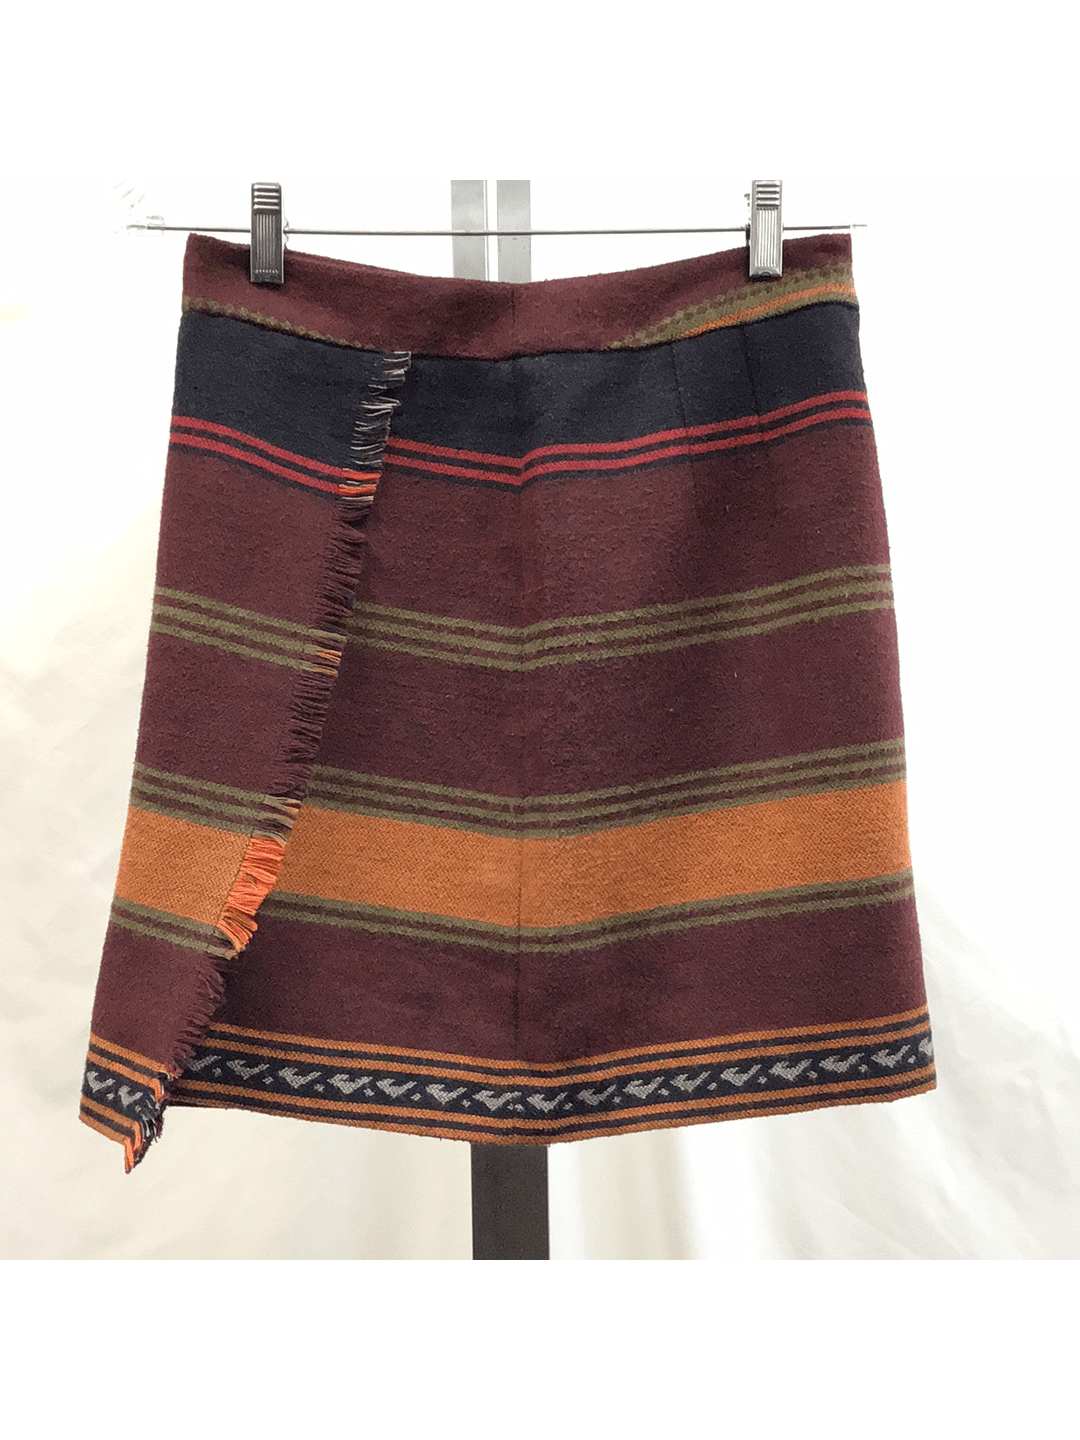 Loft Striped Skirt - Size 0 - The Kennedy Collective Thrift - 